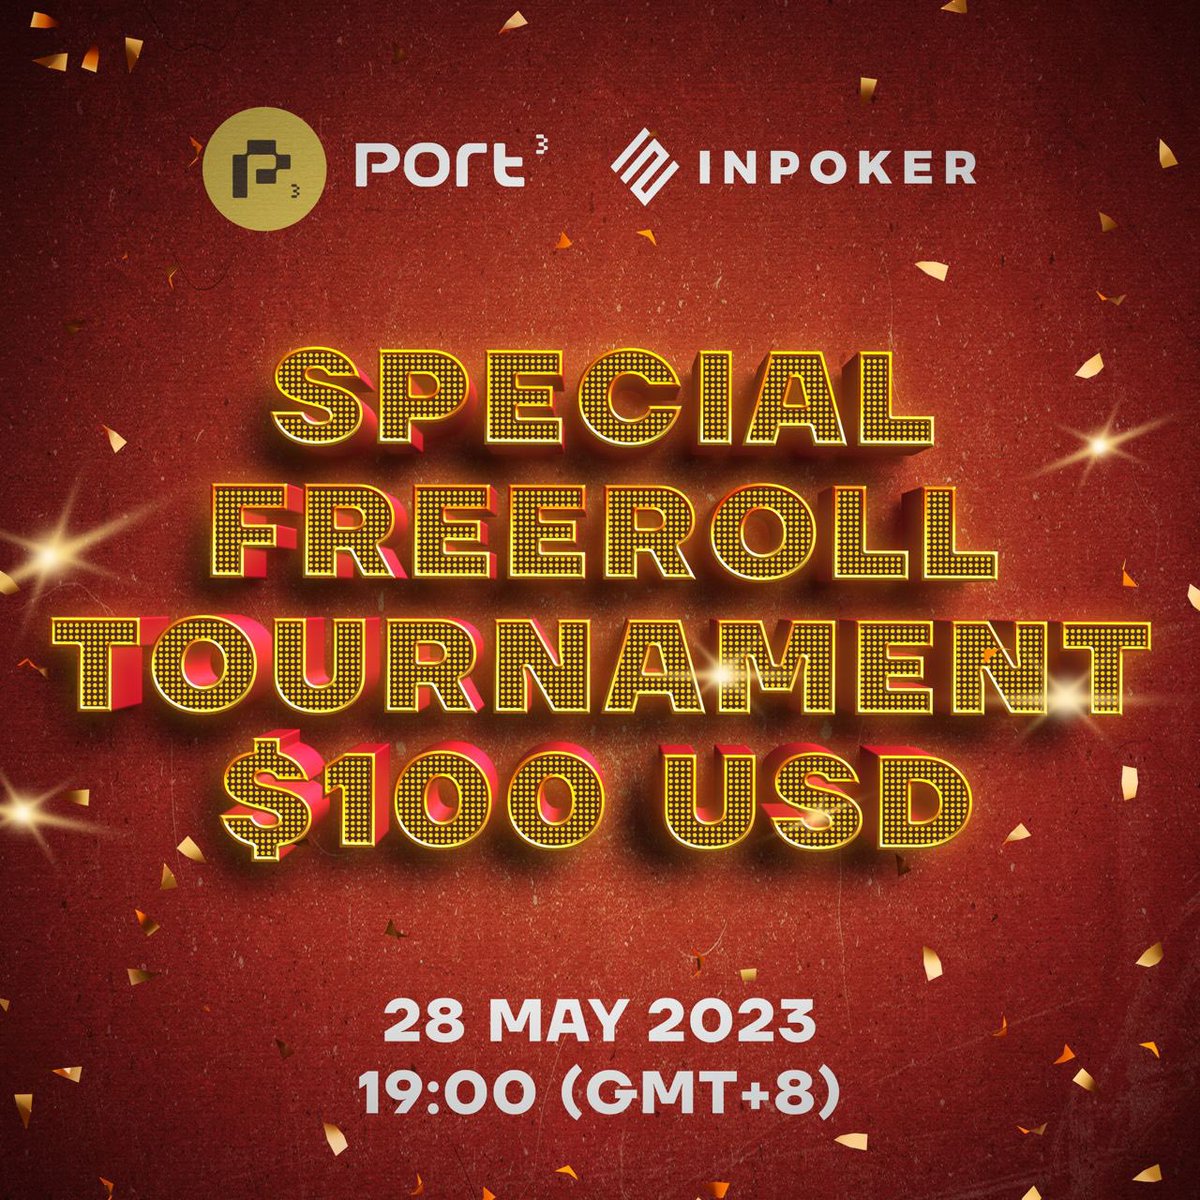 🚨Happening today!

🎉Join @port3network& @influencerpoker Poker Tournament $100!

⚡️Completed all tasks & minted your reward from #SoQuest? REGISTER NOW!

👉Tutorial on how to claim the ticket & register: bit.ly/InPoker

📅Join the game TODAY: 28.05, 11 UTC (7pm GMT+8)